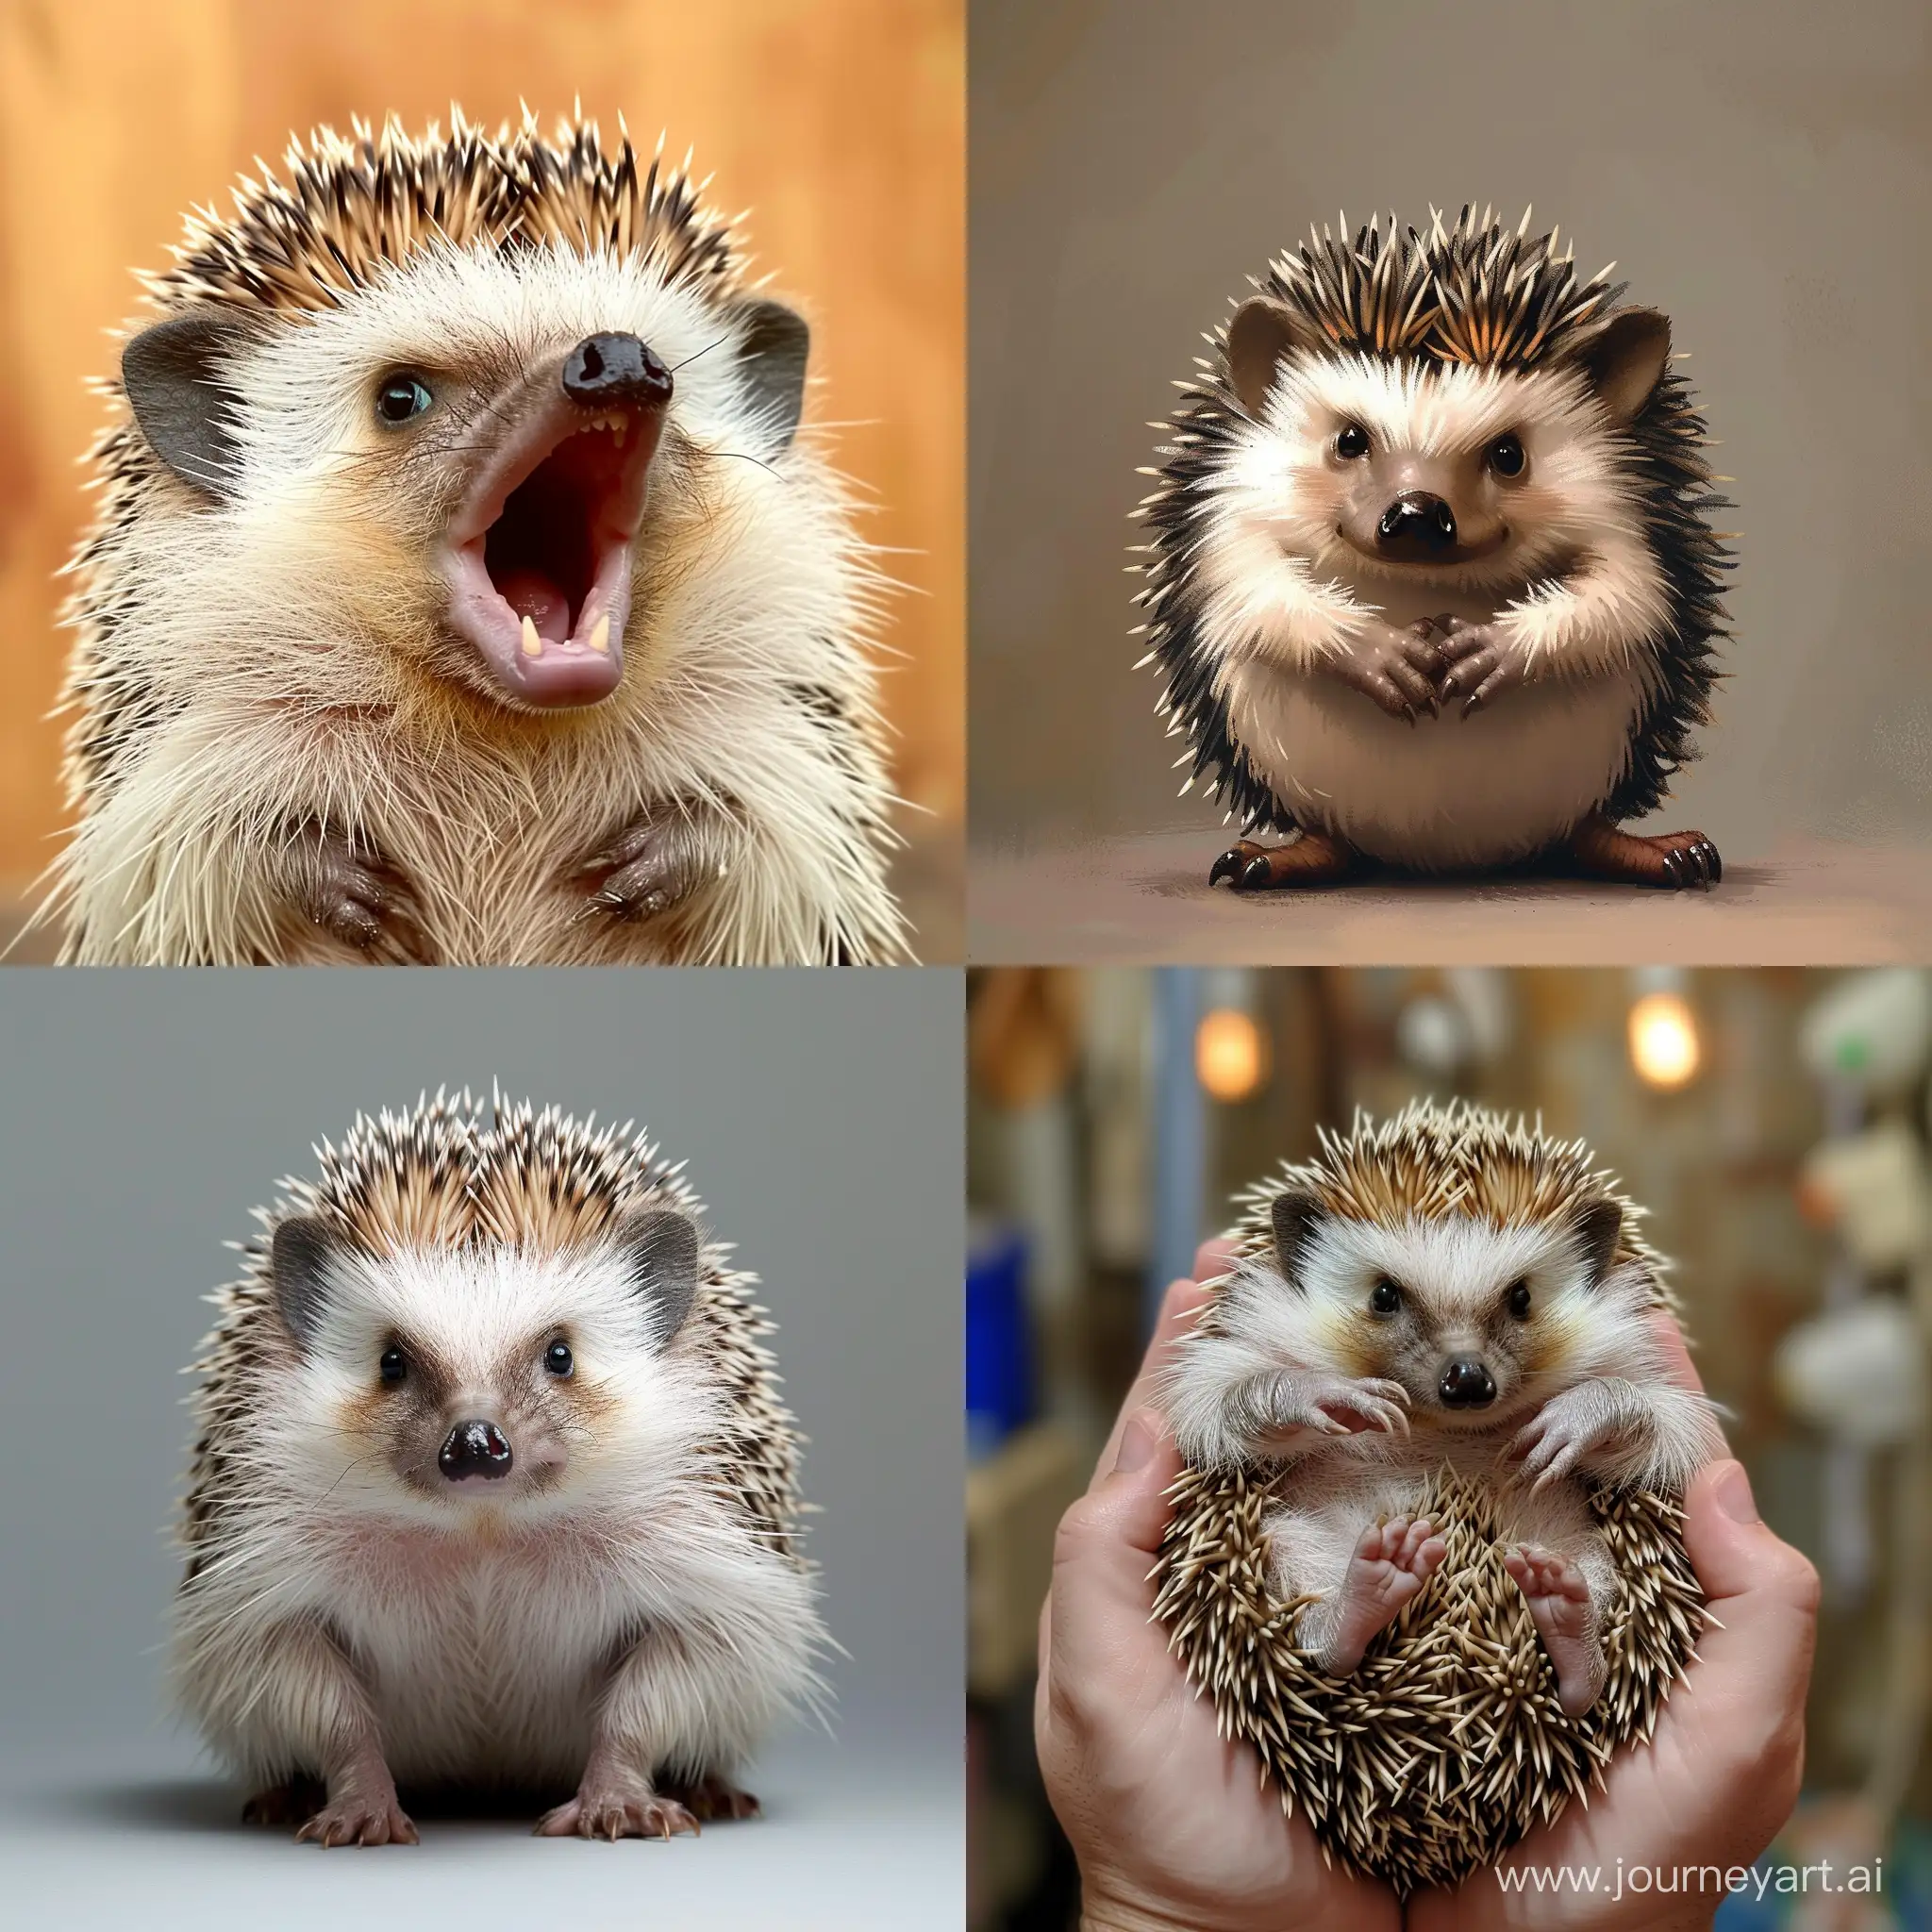 Embarrassed-Hedgehog-Reacting-Offensively